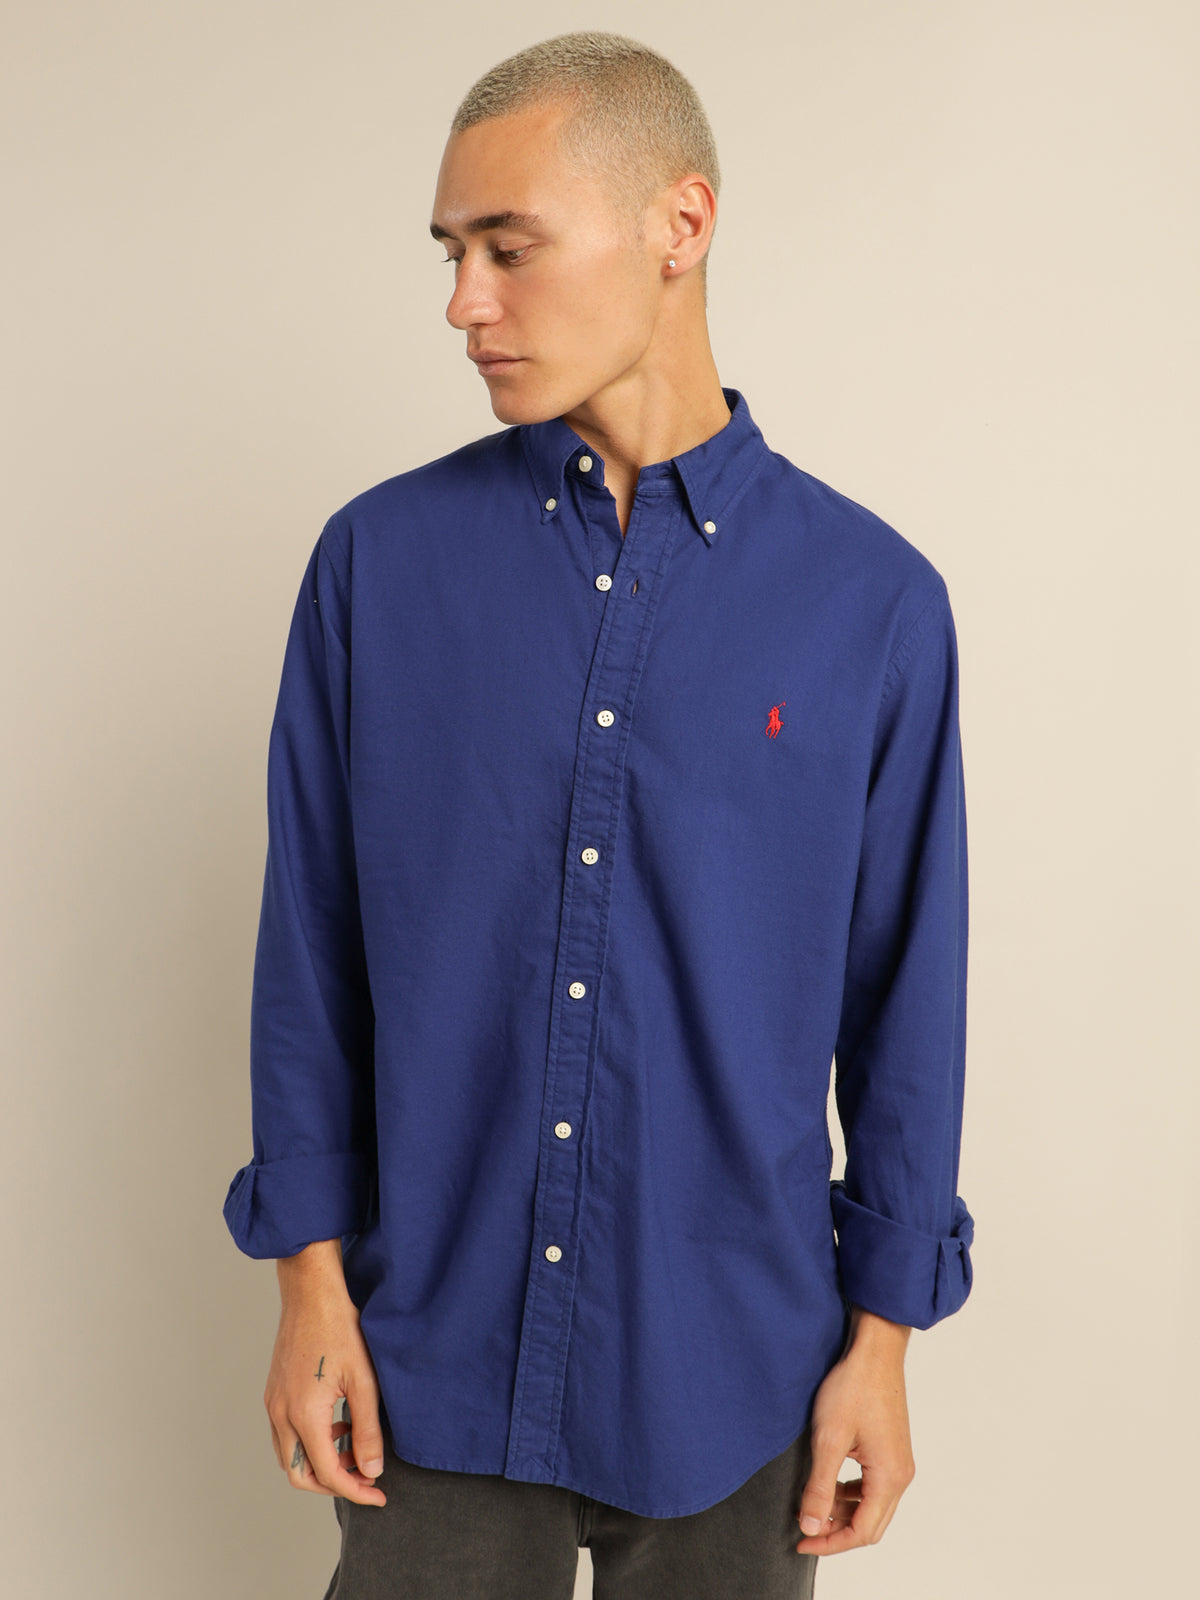 Polo Custom Fit Oxford Shirt in Sporting Royal